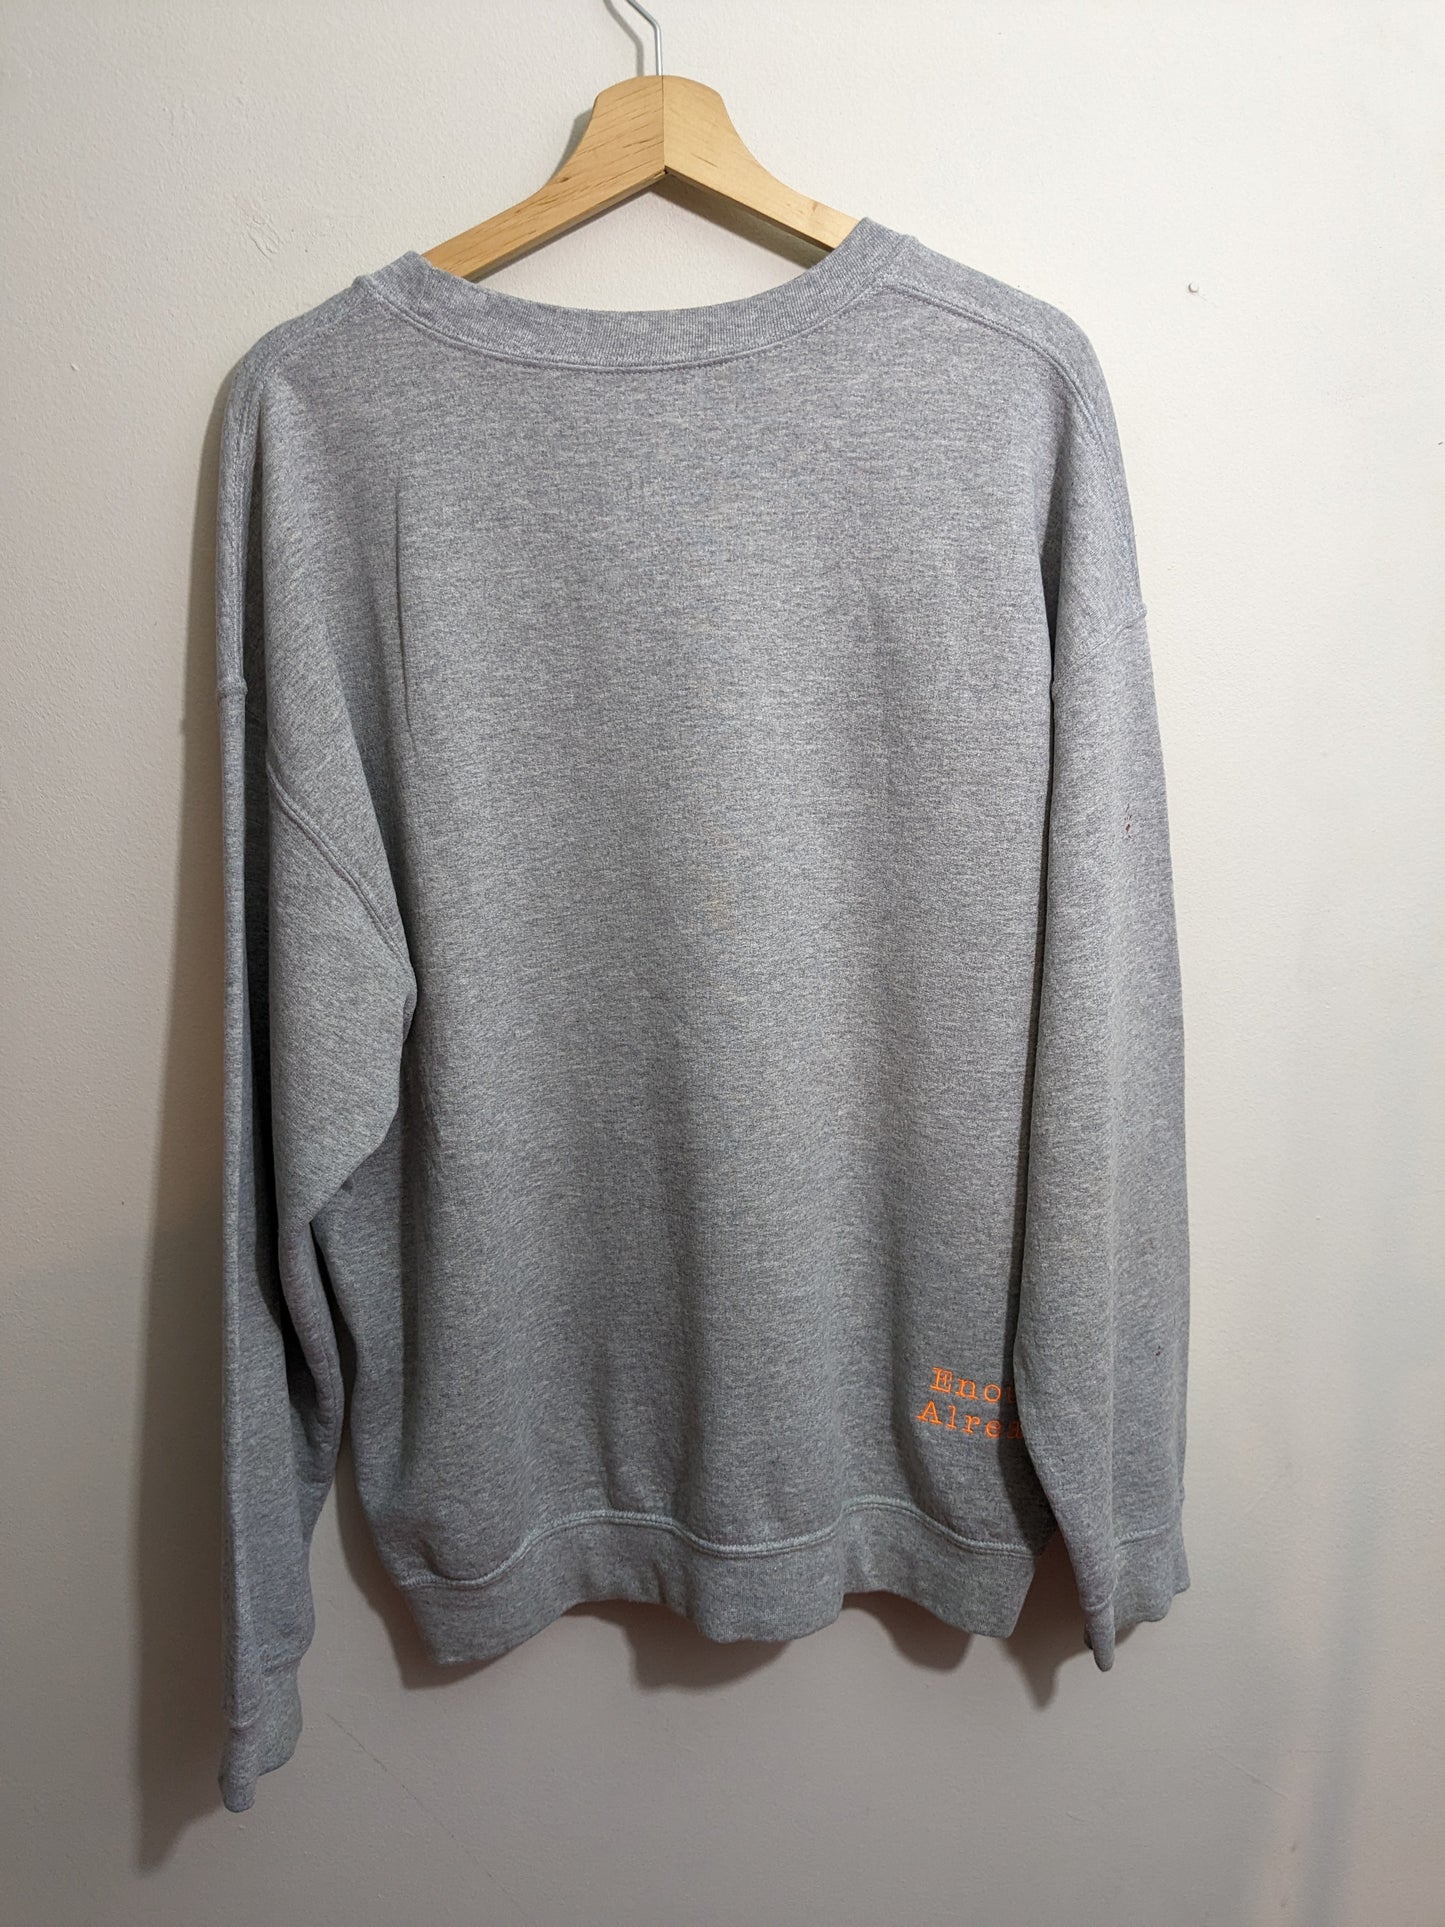 *Heavily Reduced* Size XL Classic Grey Sweatshirt - Embroidered Manic Street Preachers Lyrics Libraries Gave Us Power